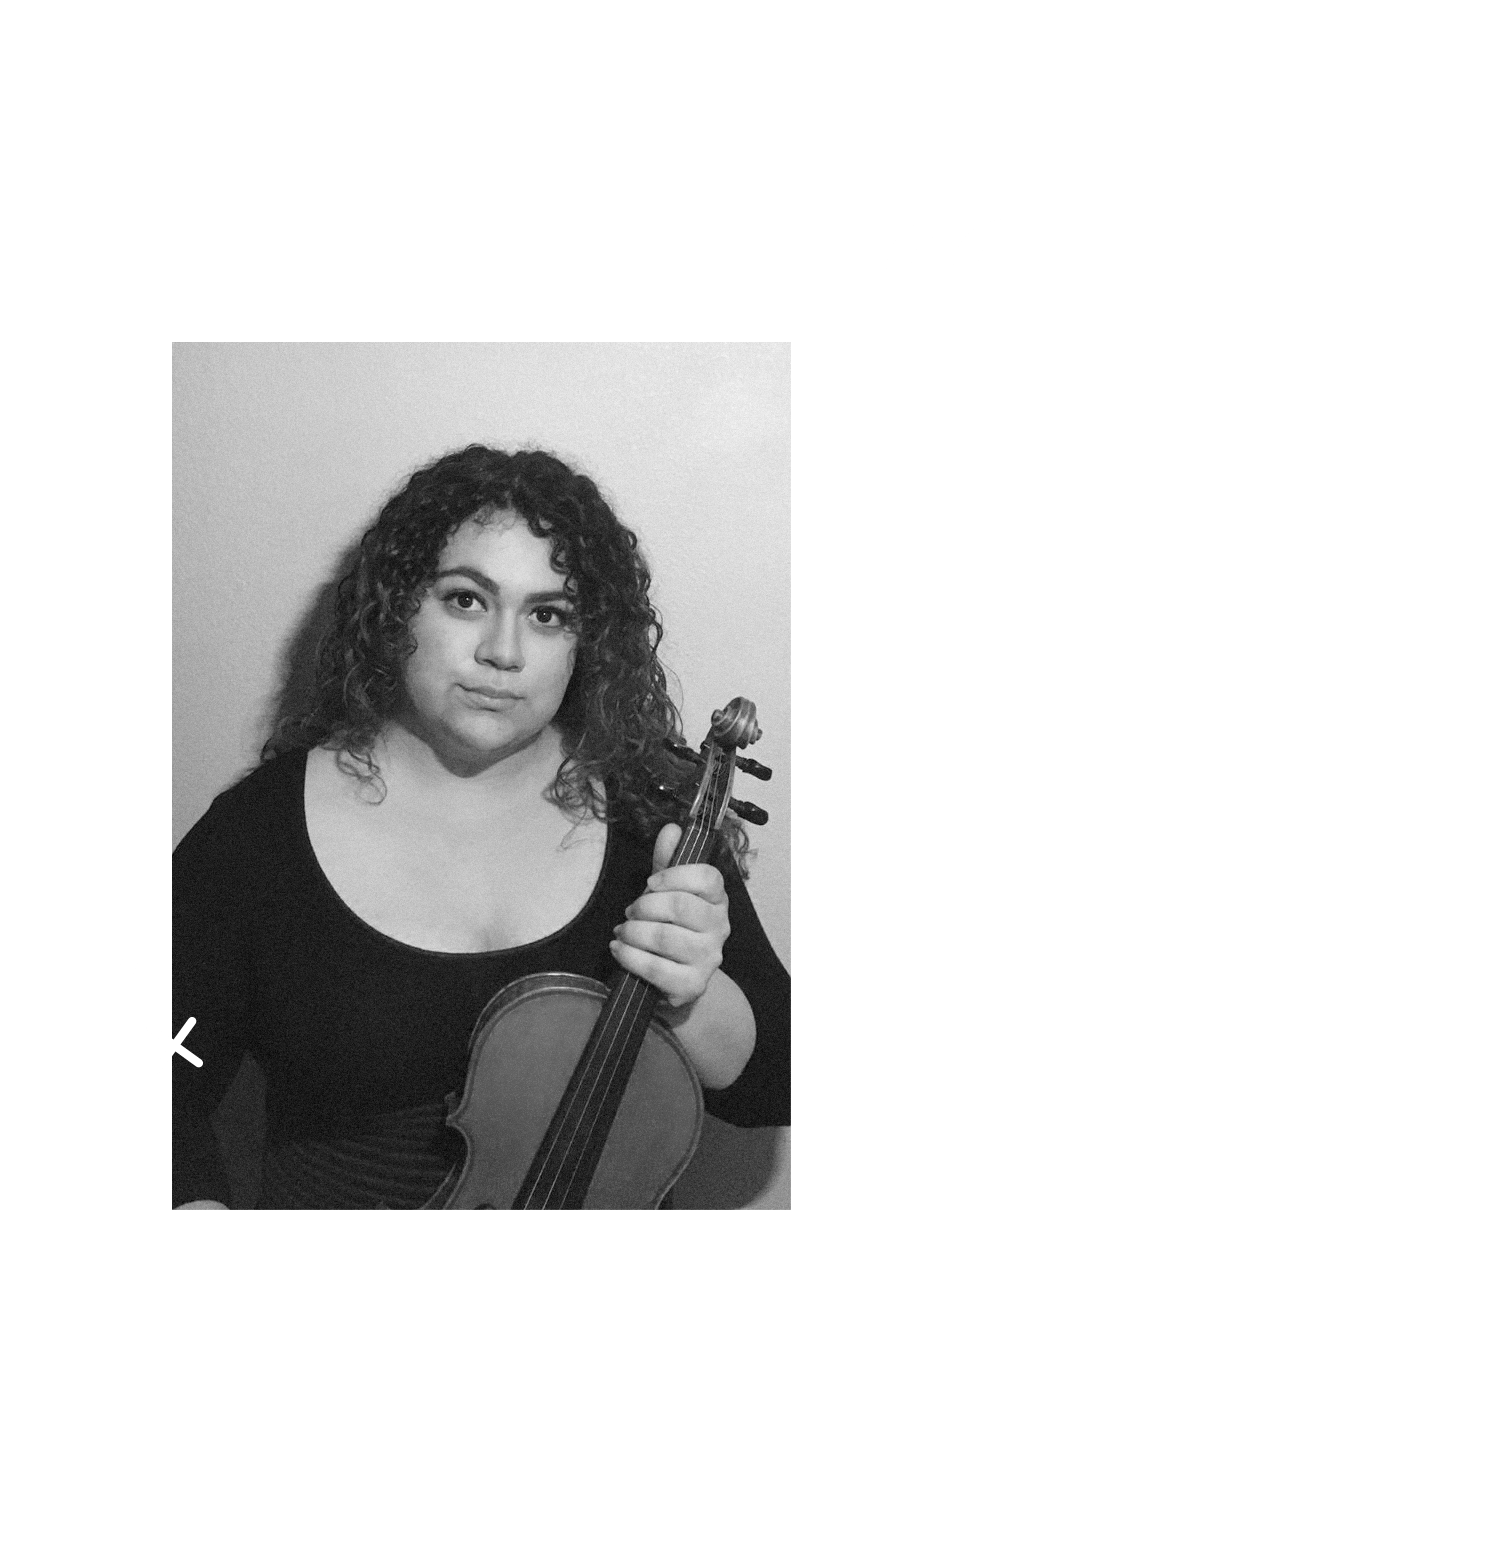 photo of Flor Retes holding a violin with a quote from scholarship recipient Flor Retes 